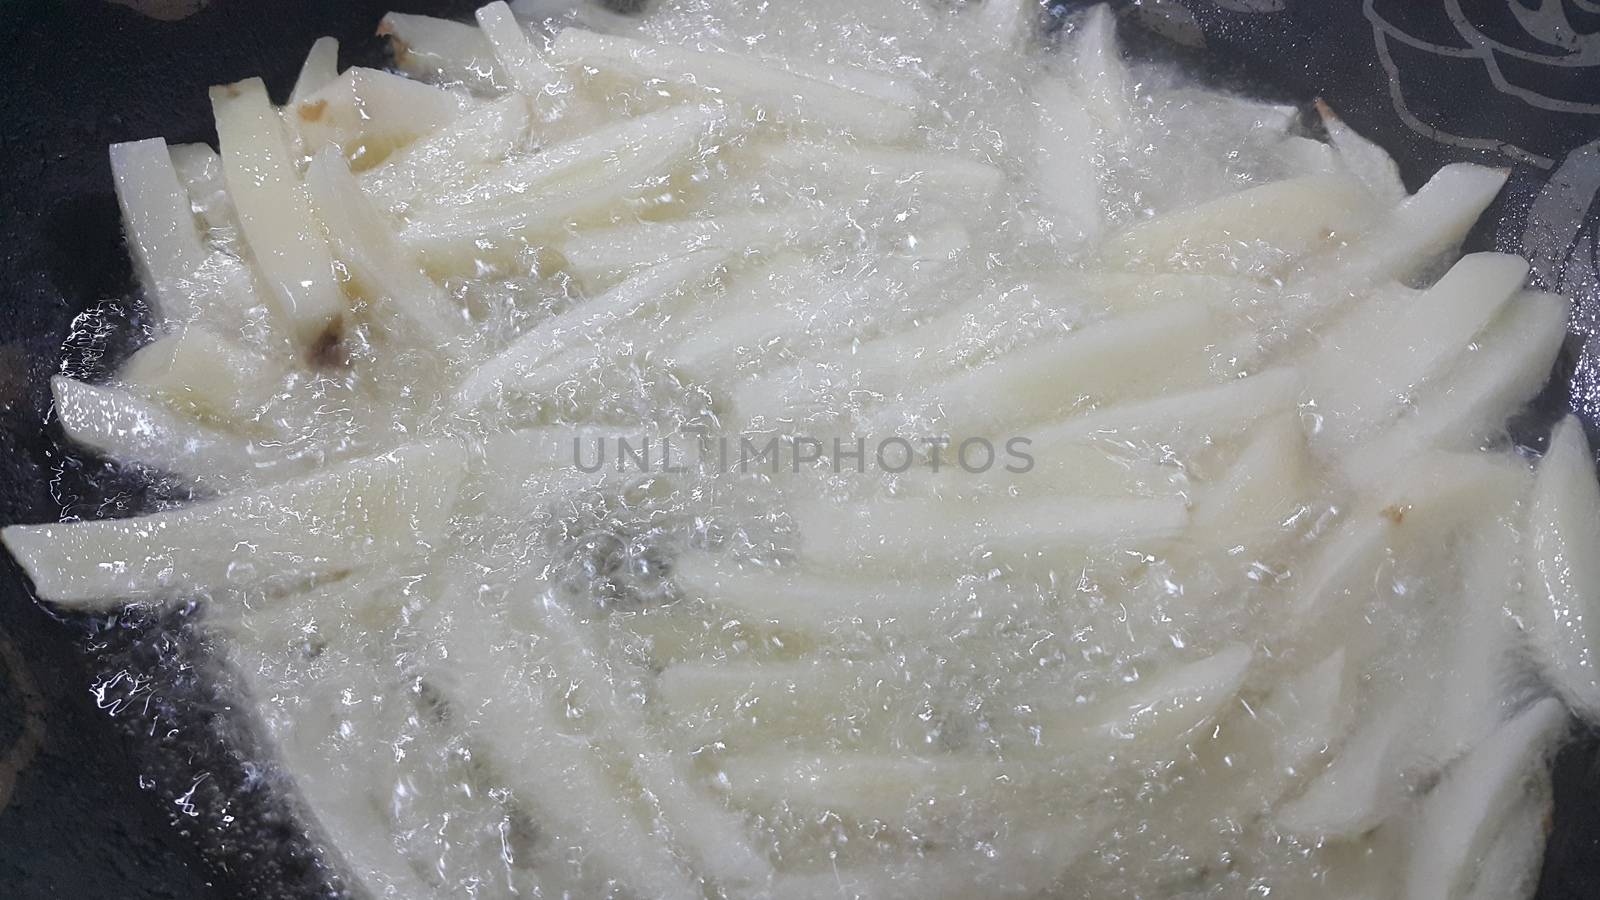 Closeup view of uncooked potato french fries or potato sticks by Photochowk